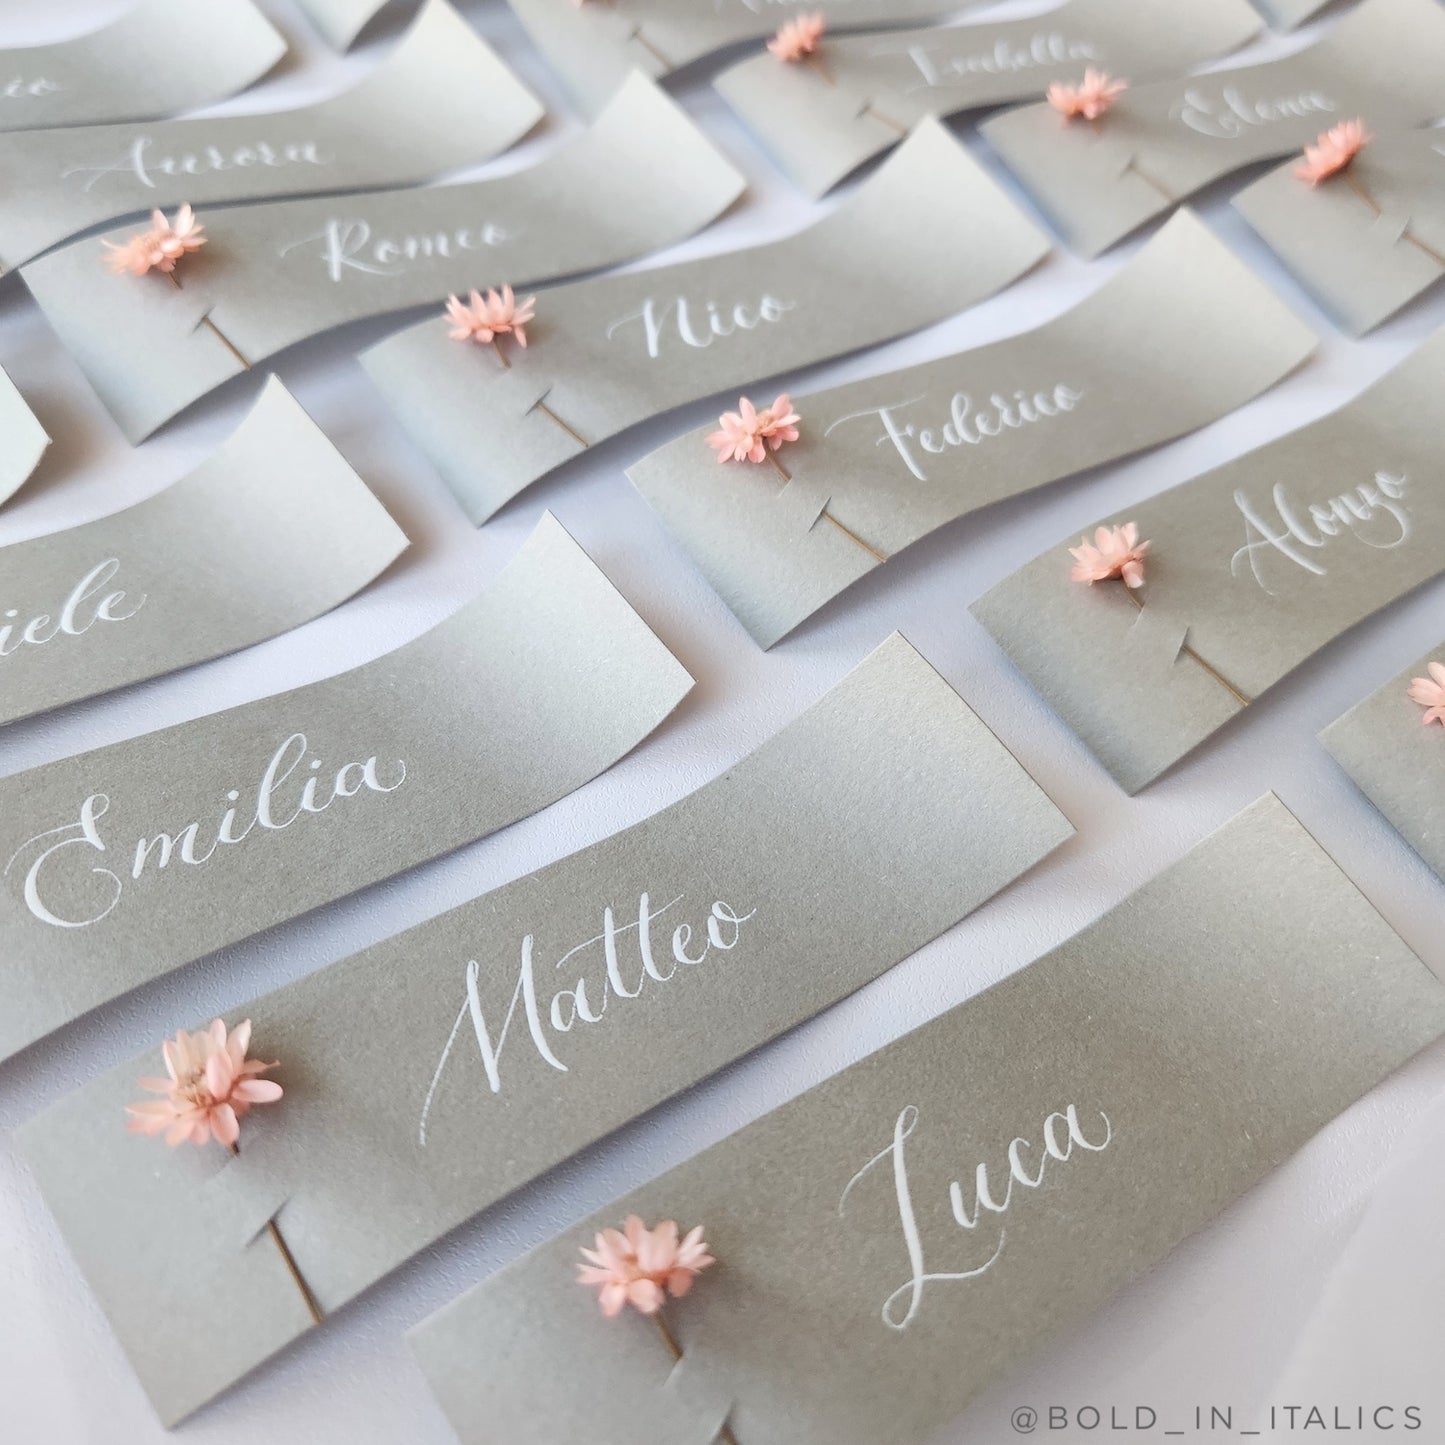 Clay Materica Calligraphy Place Cards with Flowers